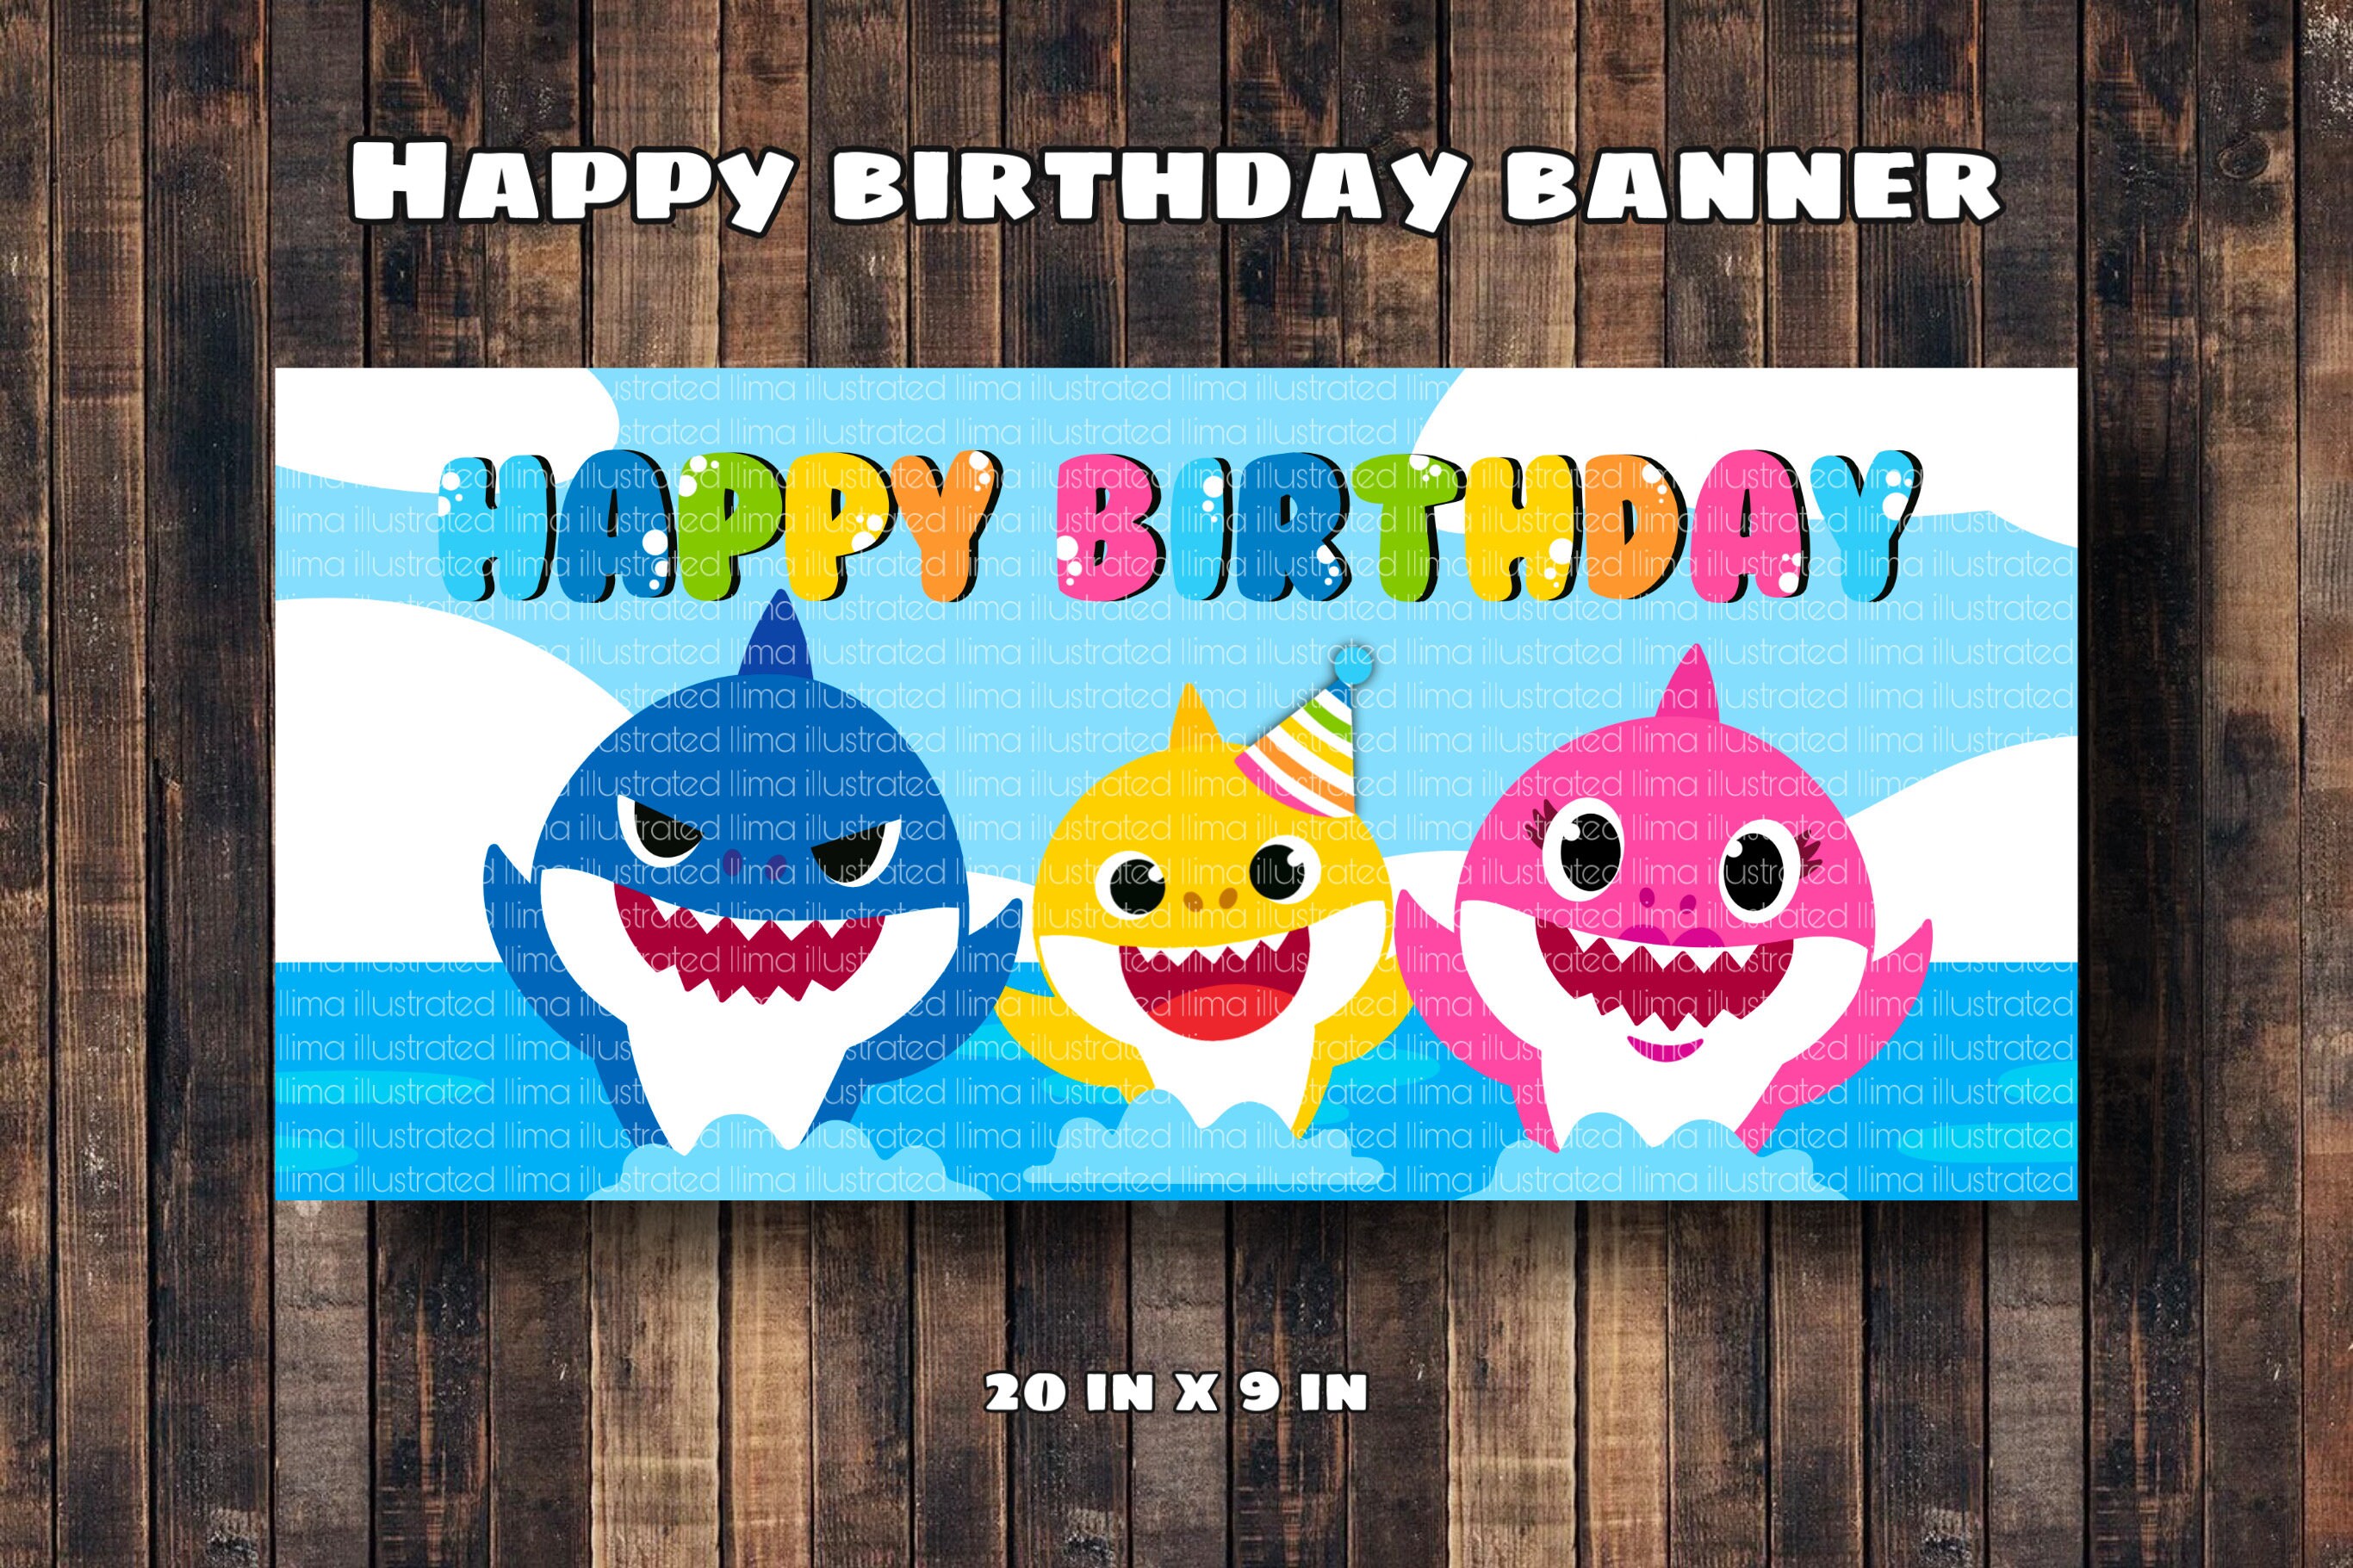 MALLMALL6 Little Shark One Birthday Banner Sharks Theme First Birthday Decoration One Highchair Banners Toddler Cake Smash Photo Props Doo Doo Shark Party Supplies for 1st Birthday Girls Boys 